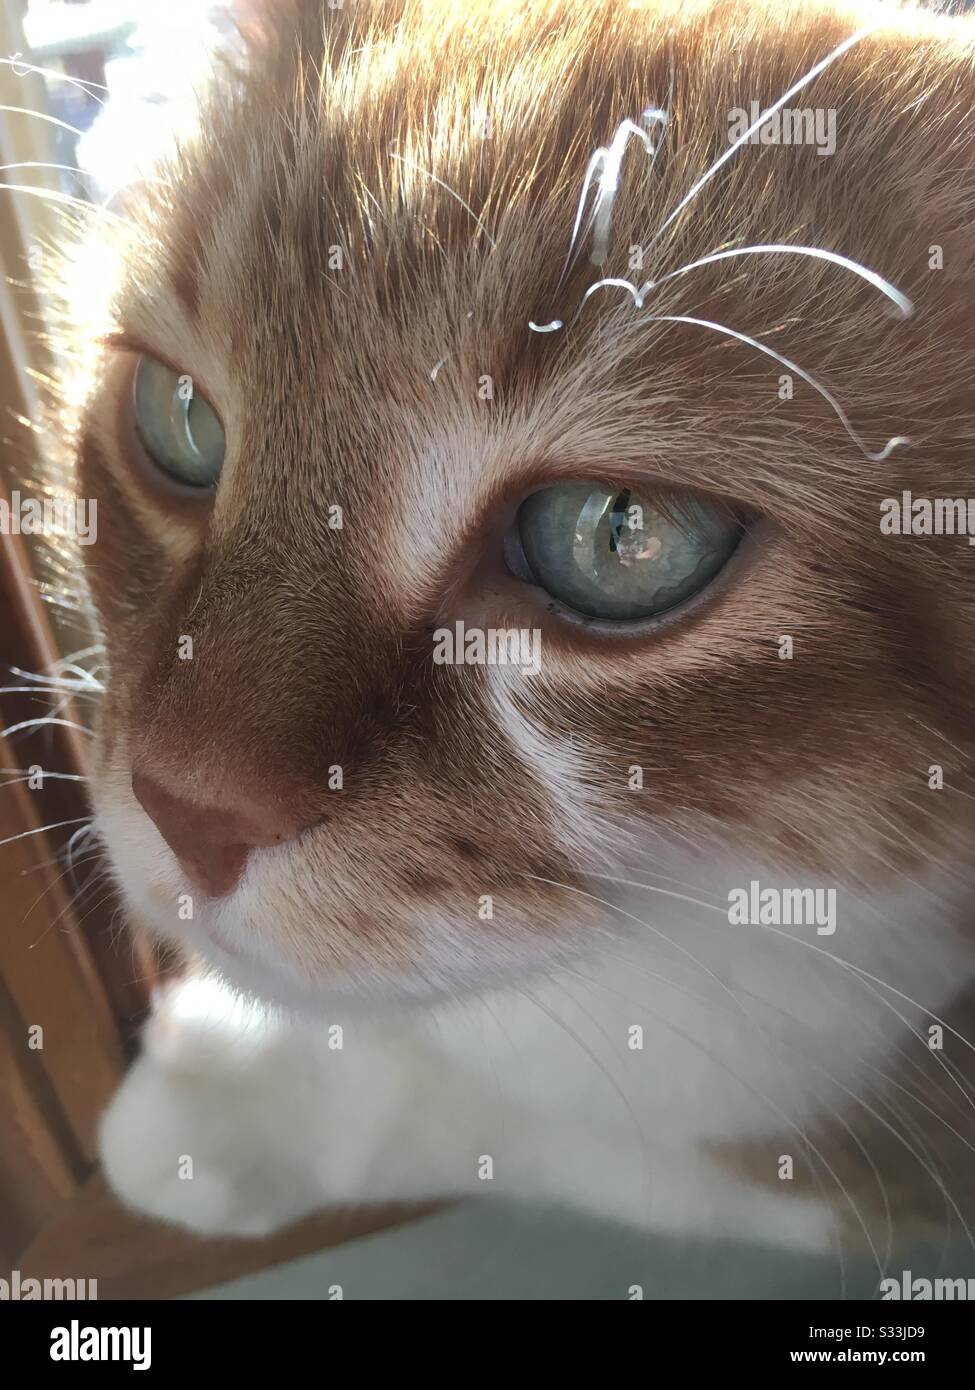 close up cat face, orange and white cat with green eyes Stock Photo